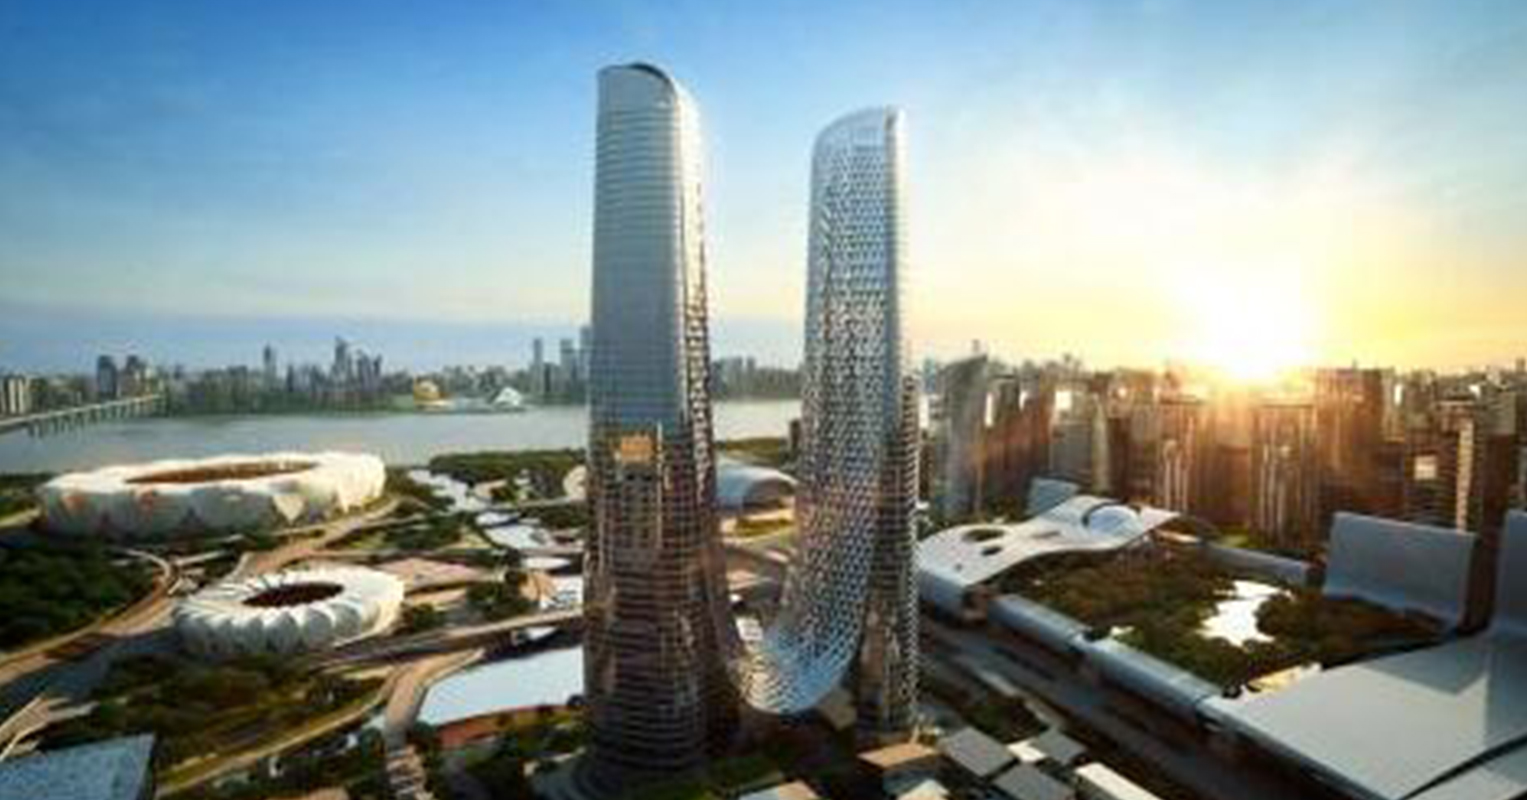 Sinomeasure products are used in the tallest building in Hangzhou